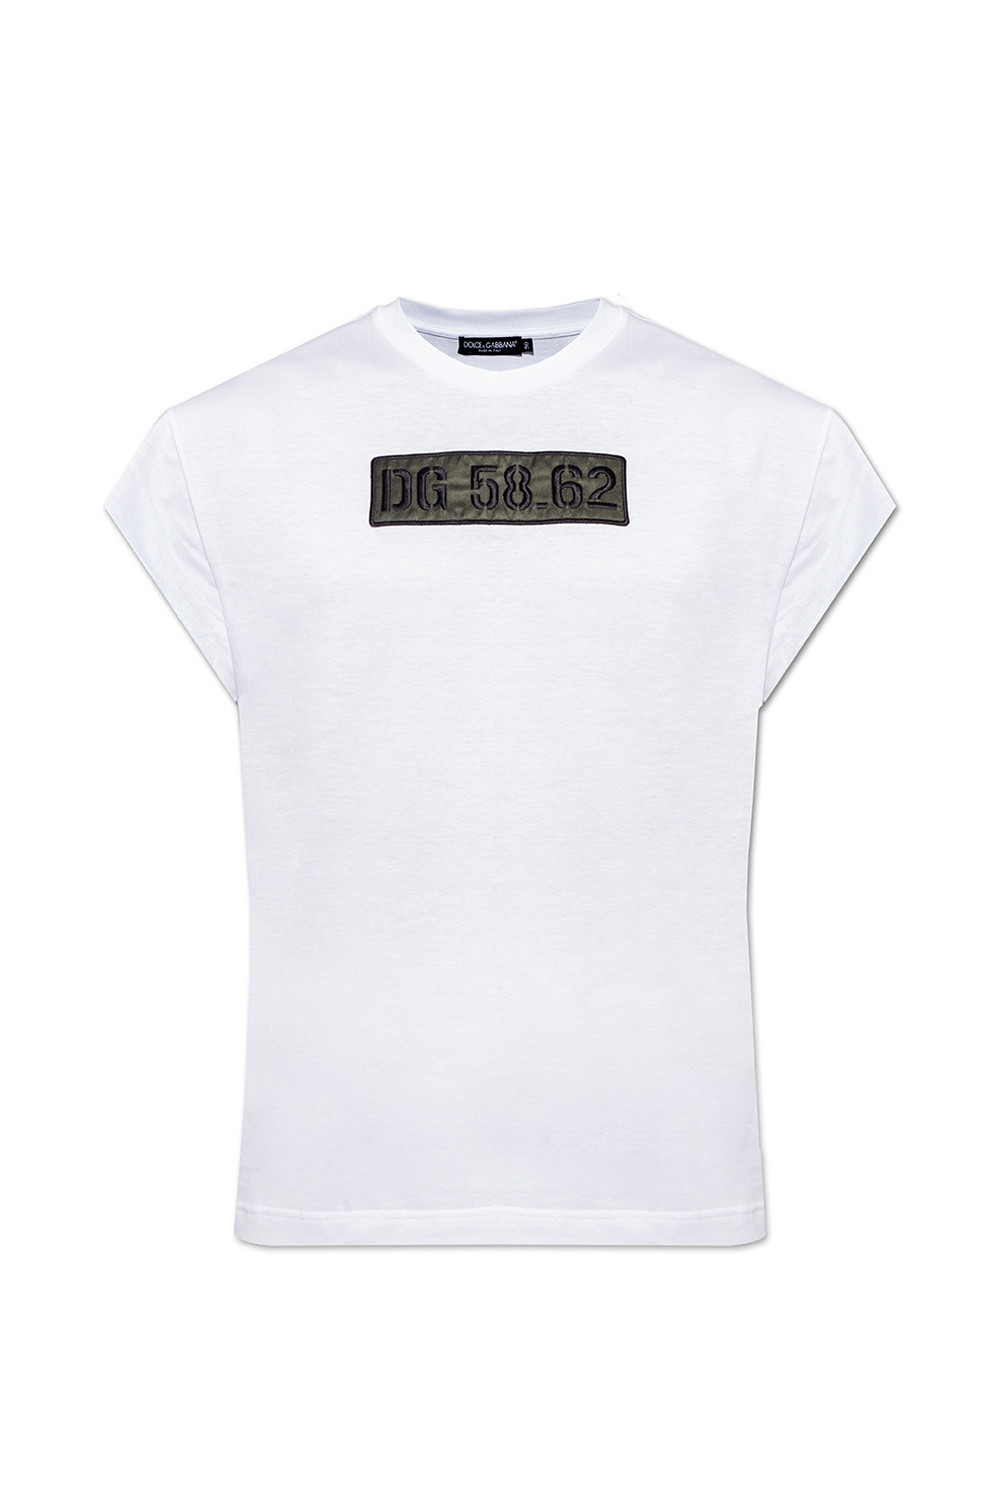 dolce phone & Gabbana The ‘Reborn to Live’ collection T-shirt